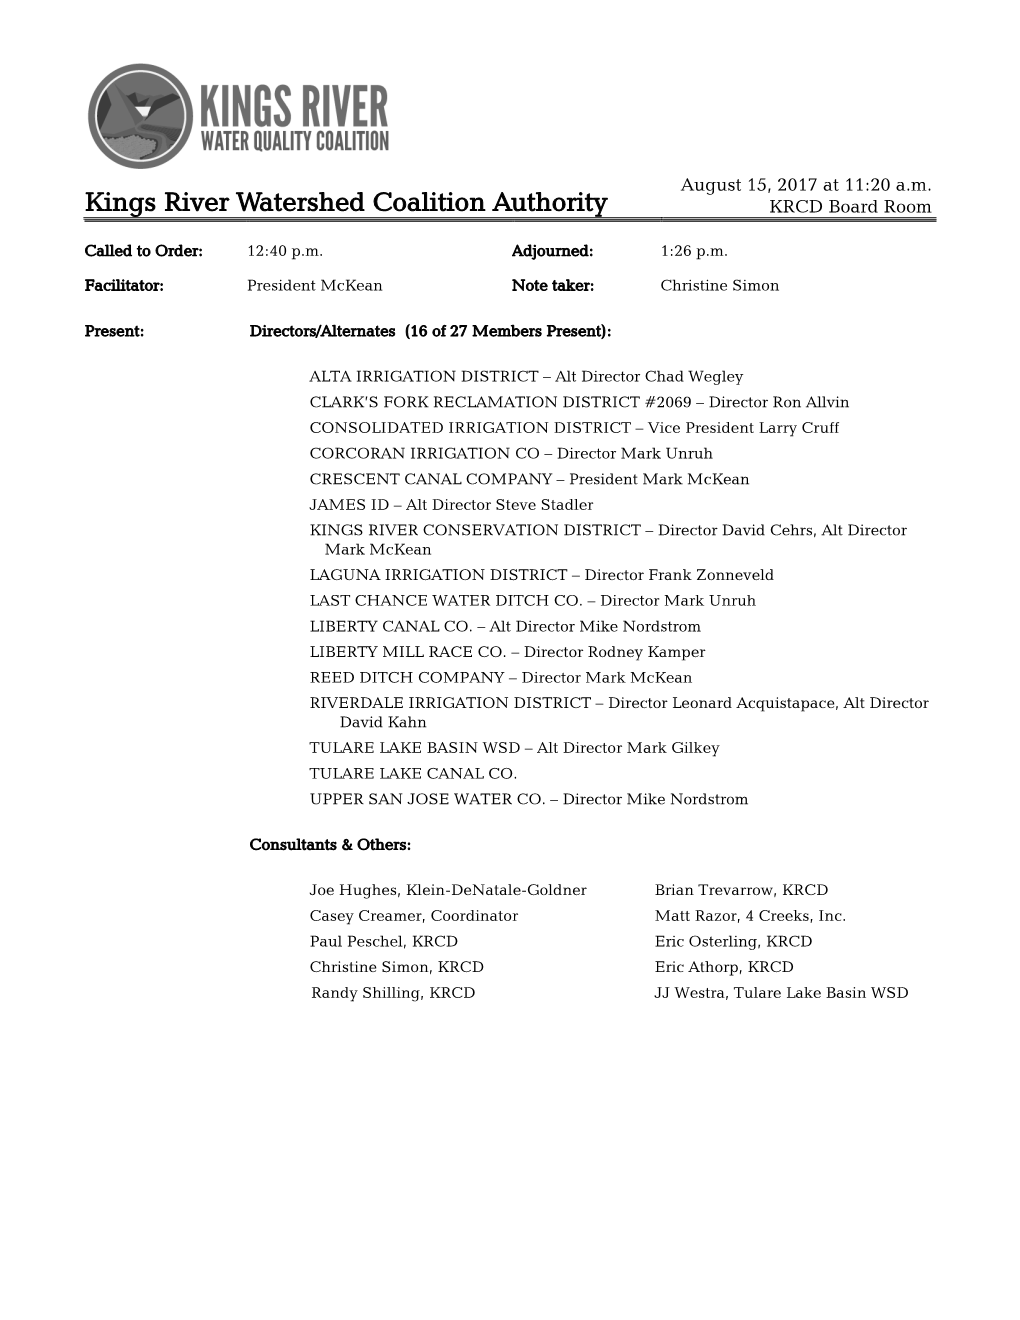 Kings River Watershed Coalition Authority KRCD Board Room